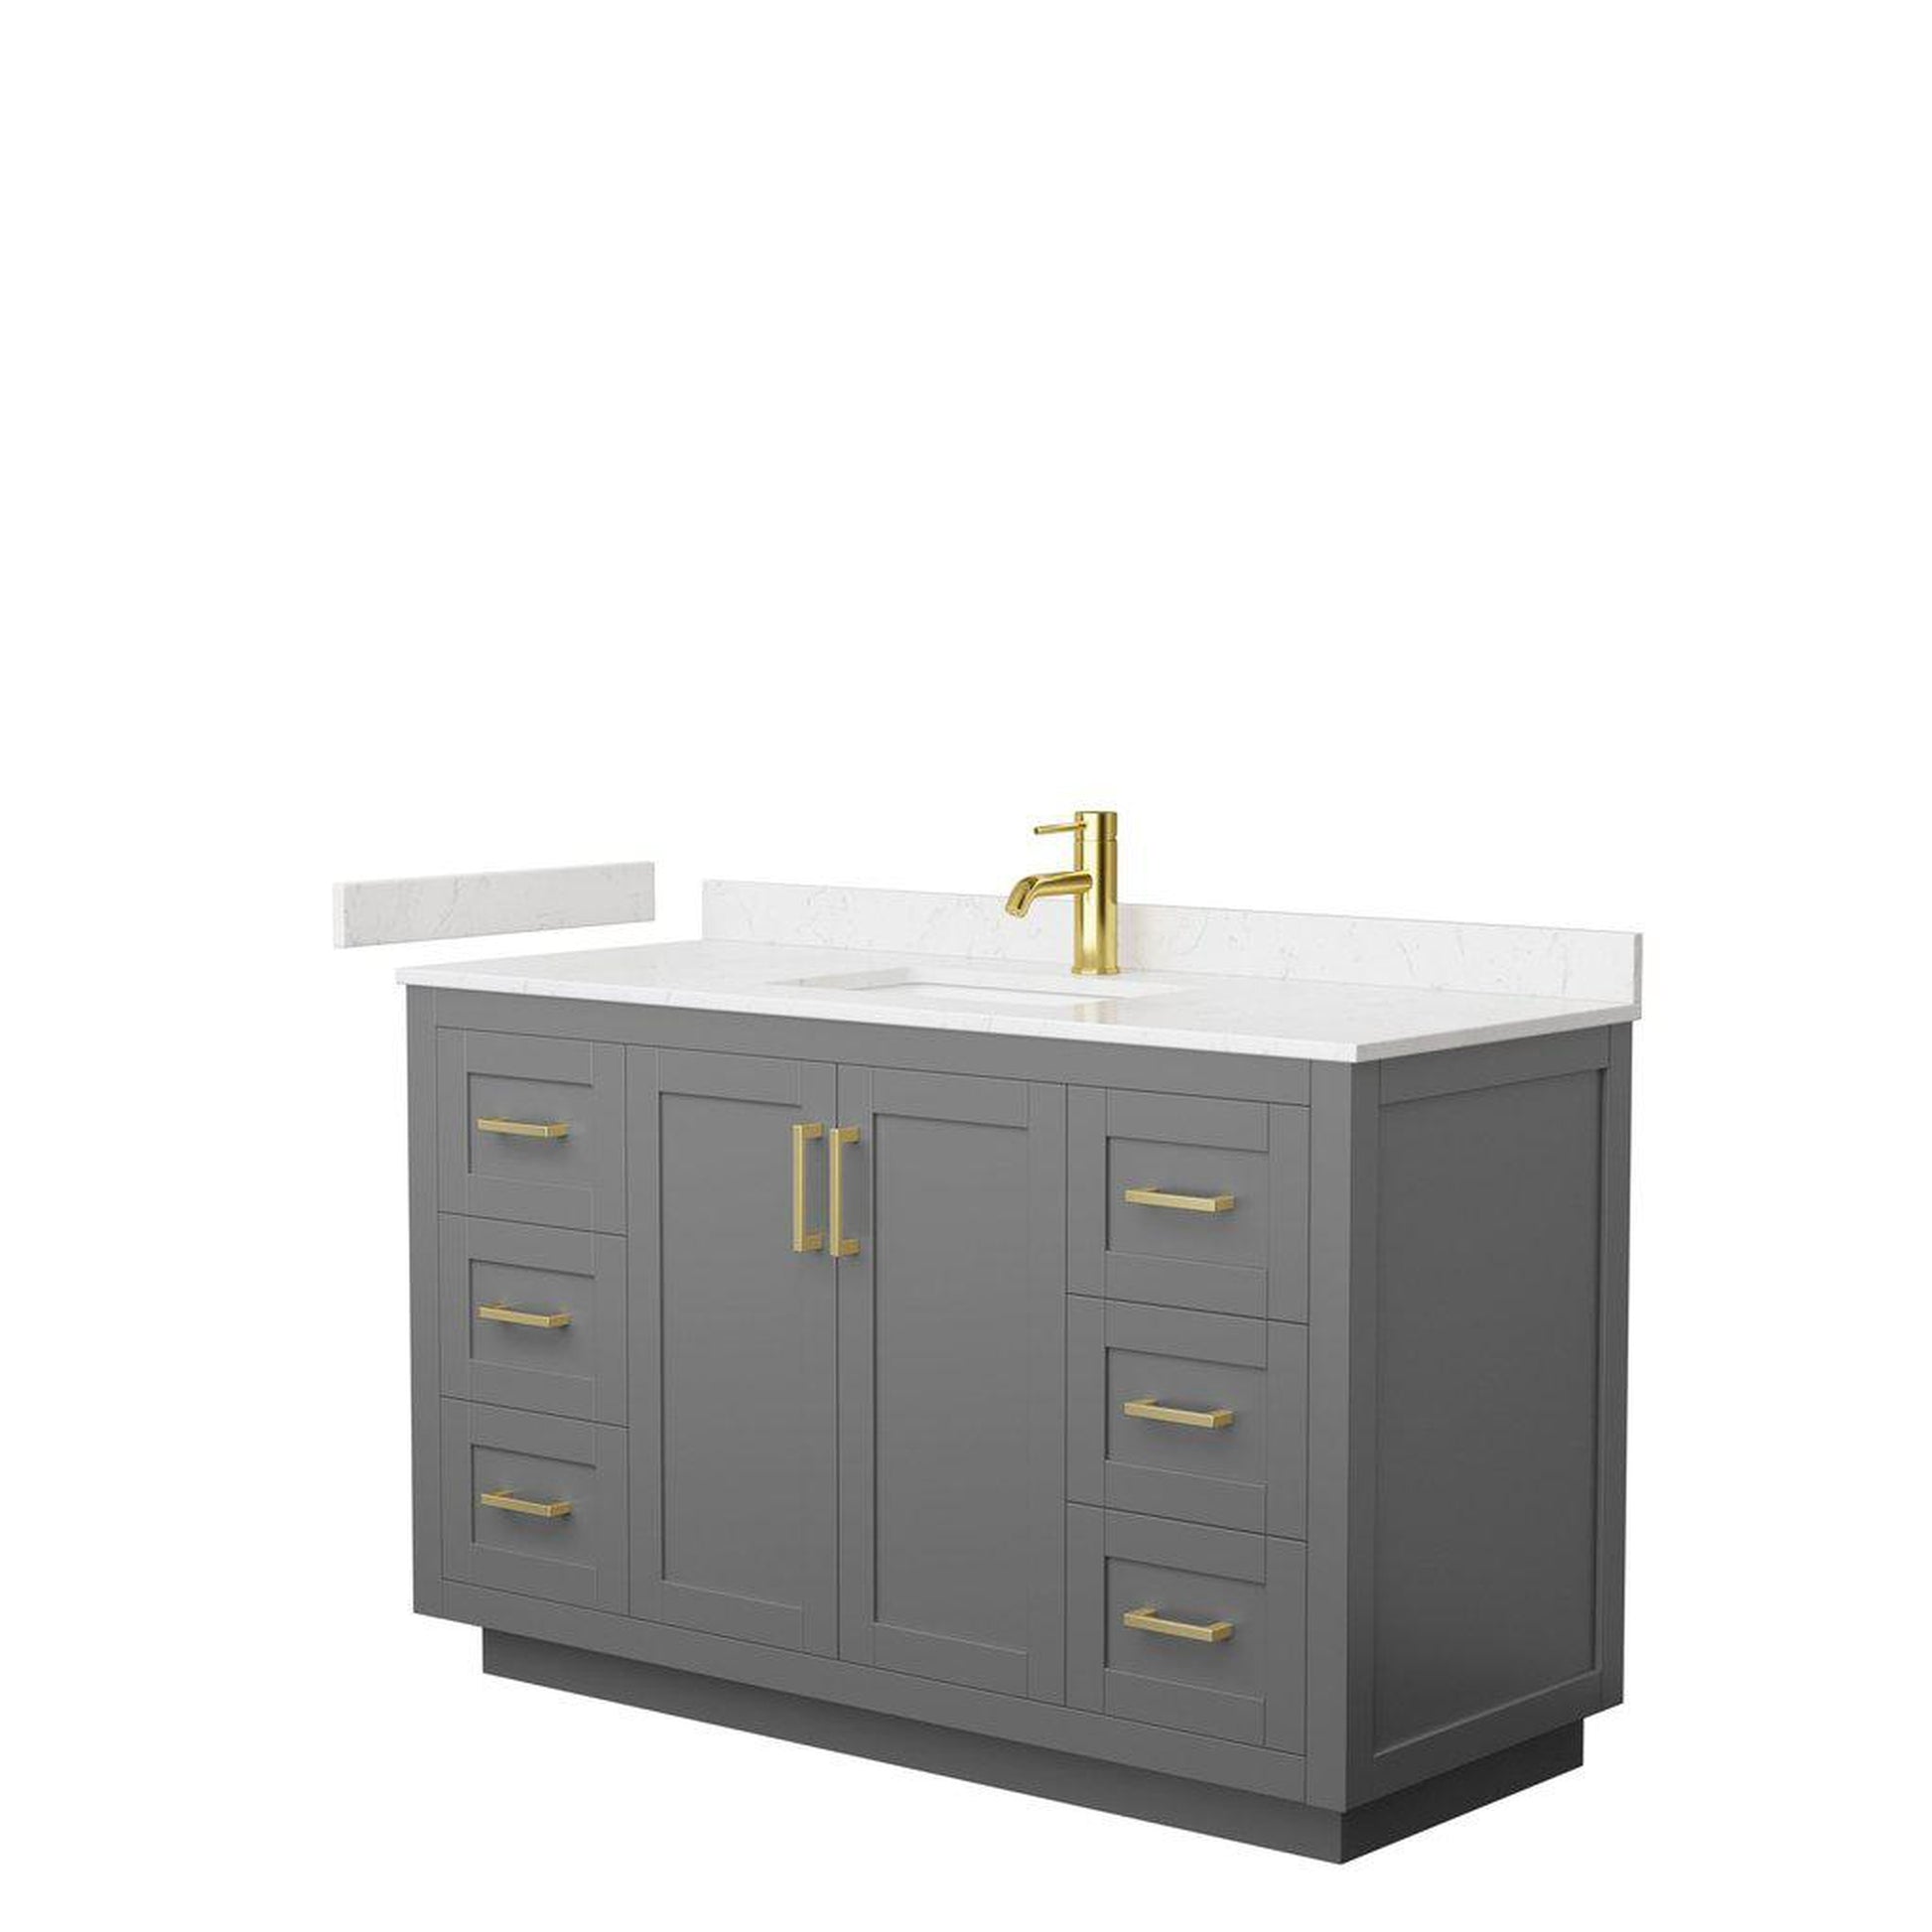 Wyndham Collection Miranda 54" Single Bathroom Dark Gray Vanity Set With Light-Vein Carrara Cultured Marble Countertop, Undermount Square Sink, And Brushed Gold Trim